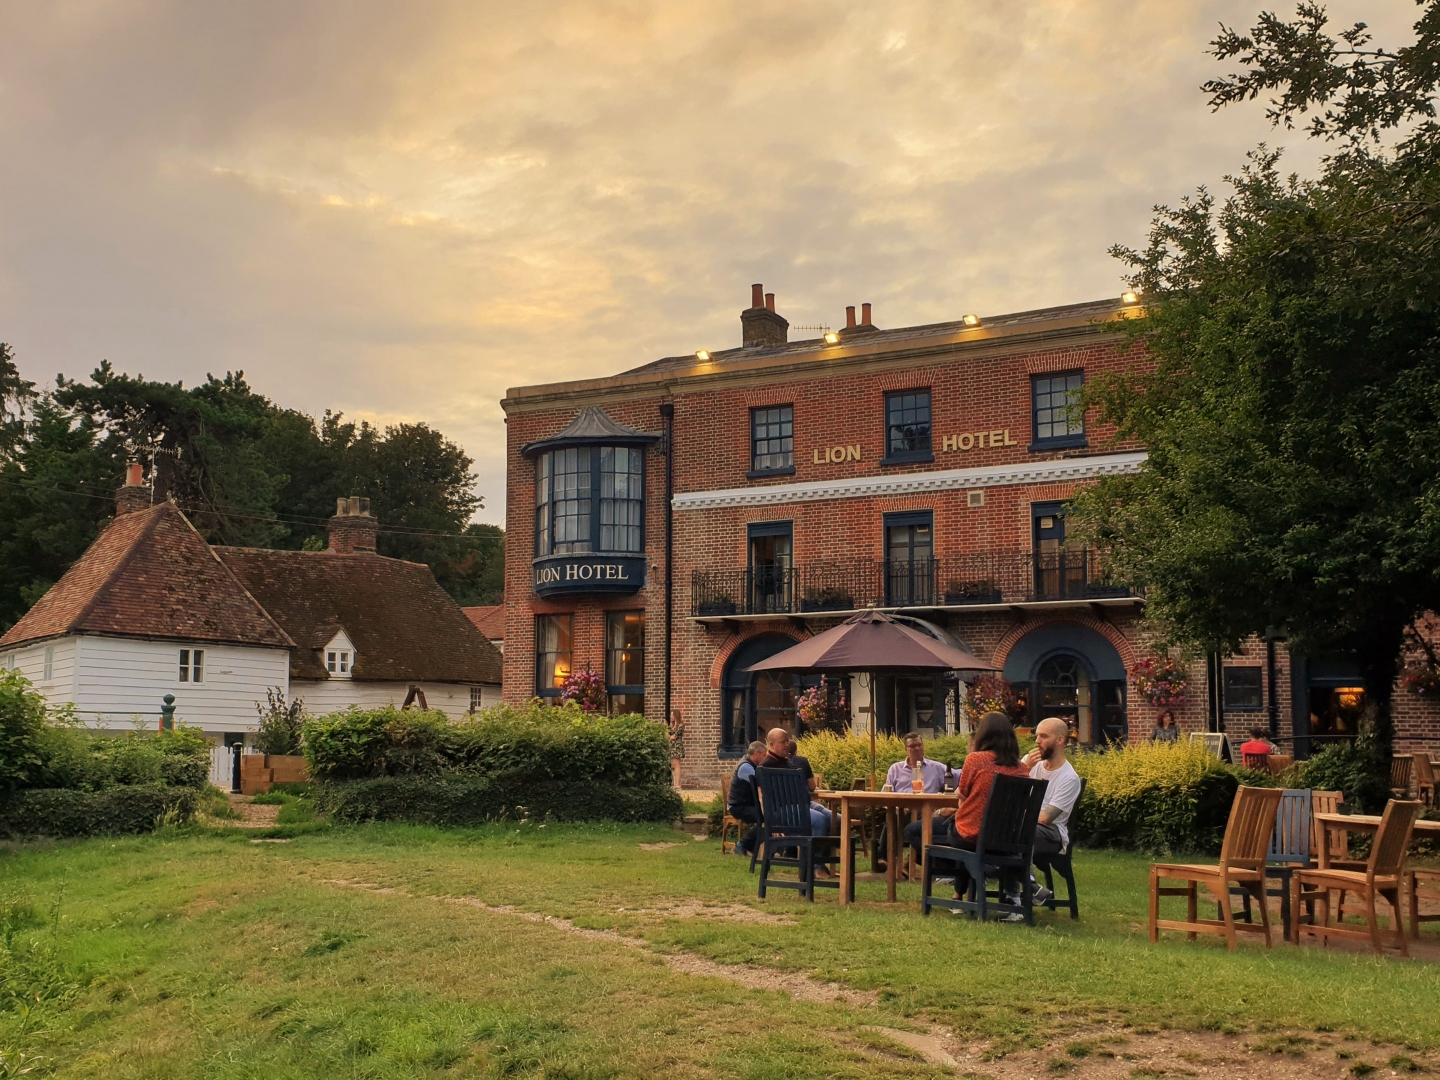 The Lion Hotel in Farningham on a summer's evening, August 2019